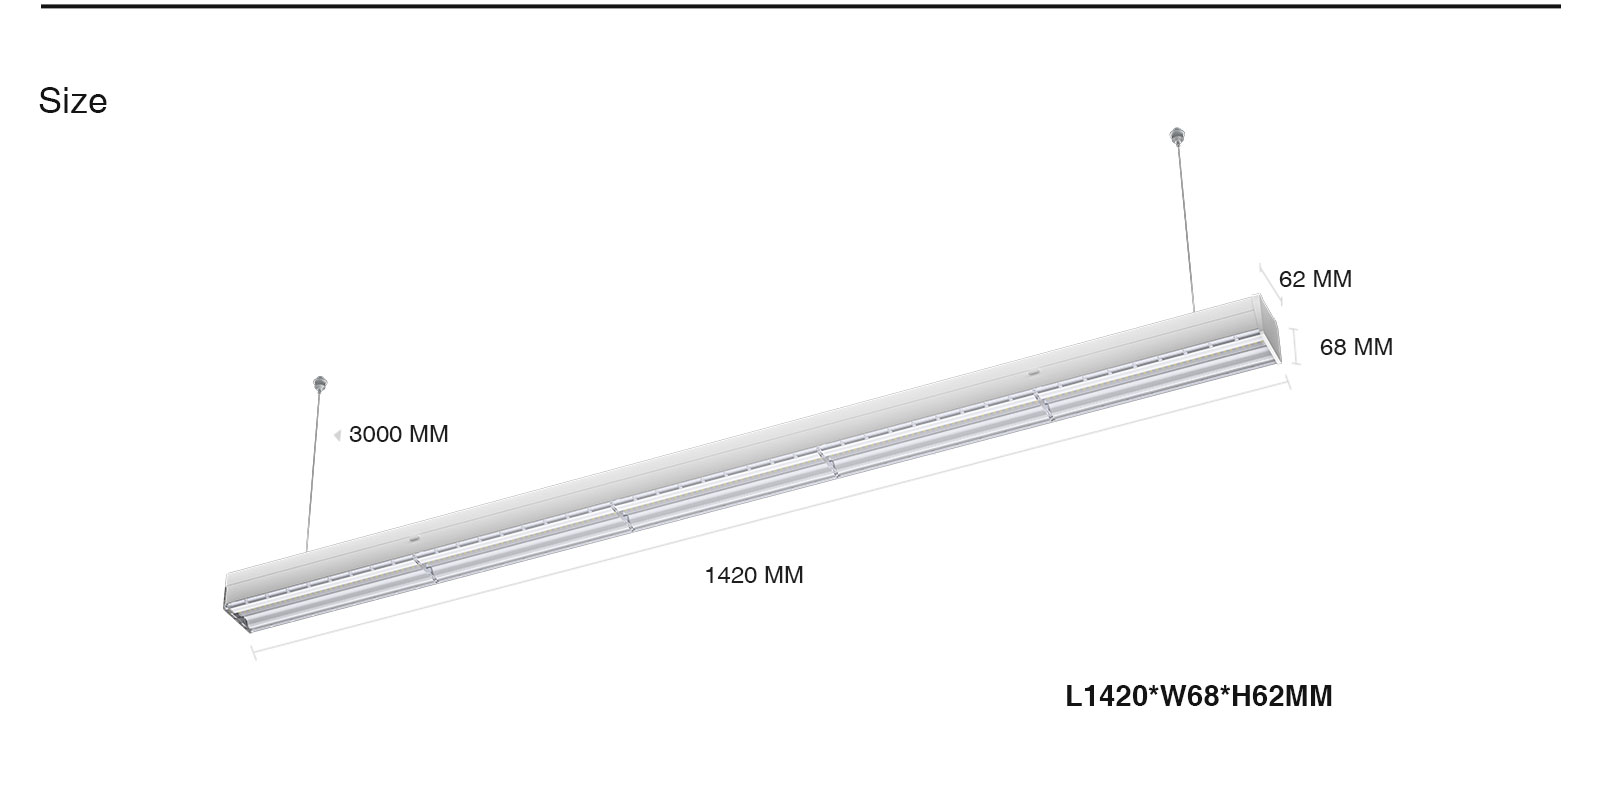 MLL002-A 5-Wire Trunking For LED Linear Lights 5-year Warranty-Linear Lights--ML00203